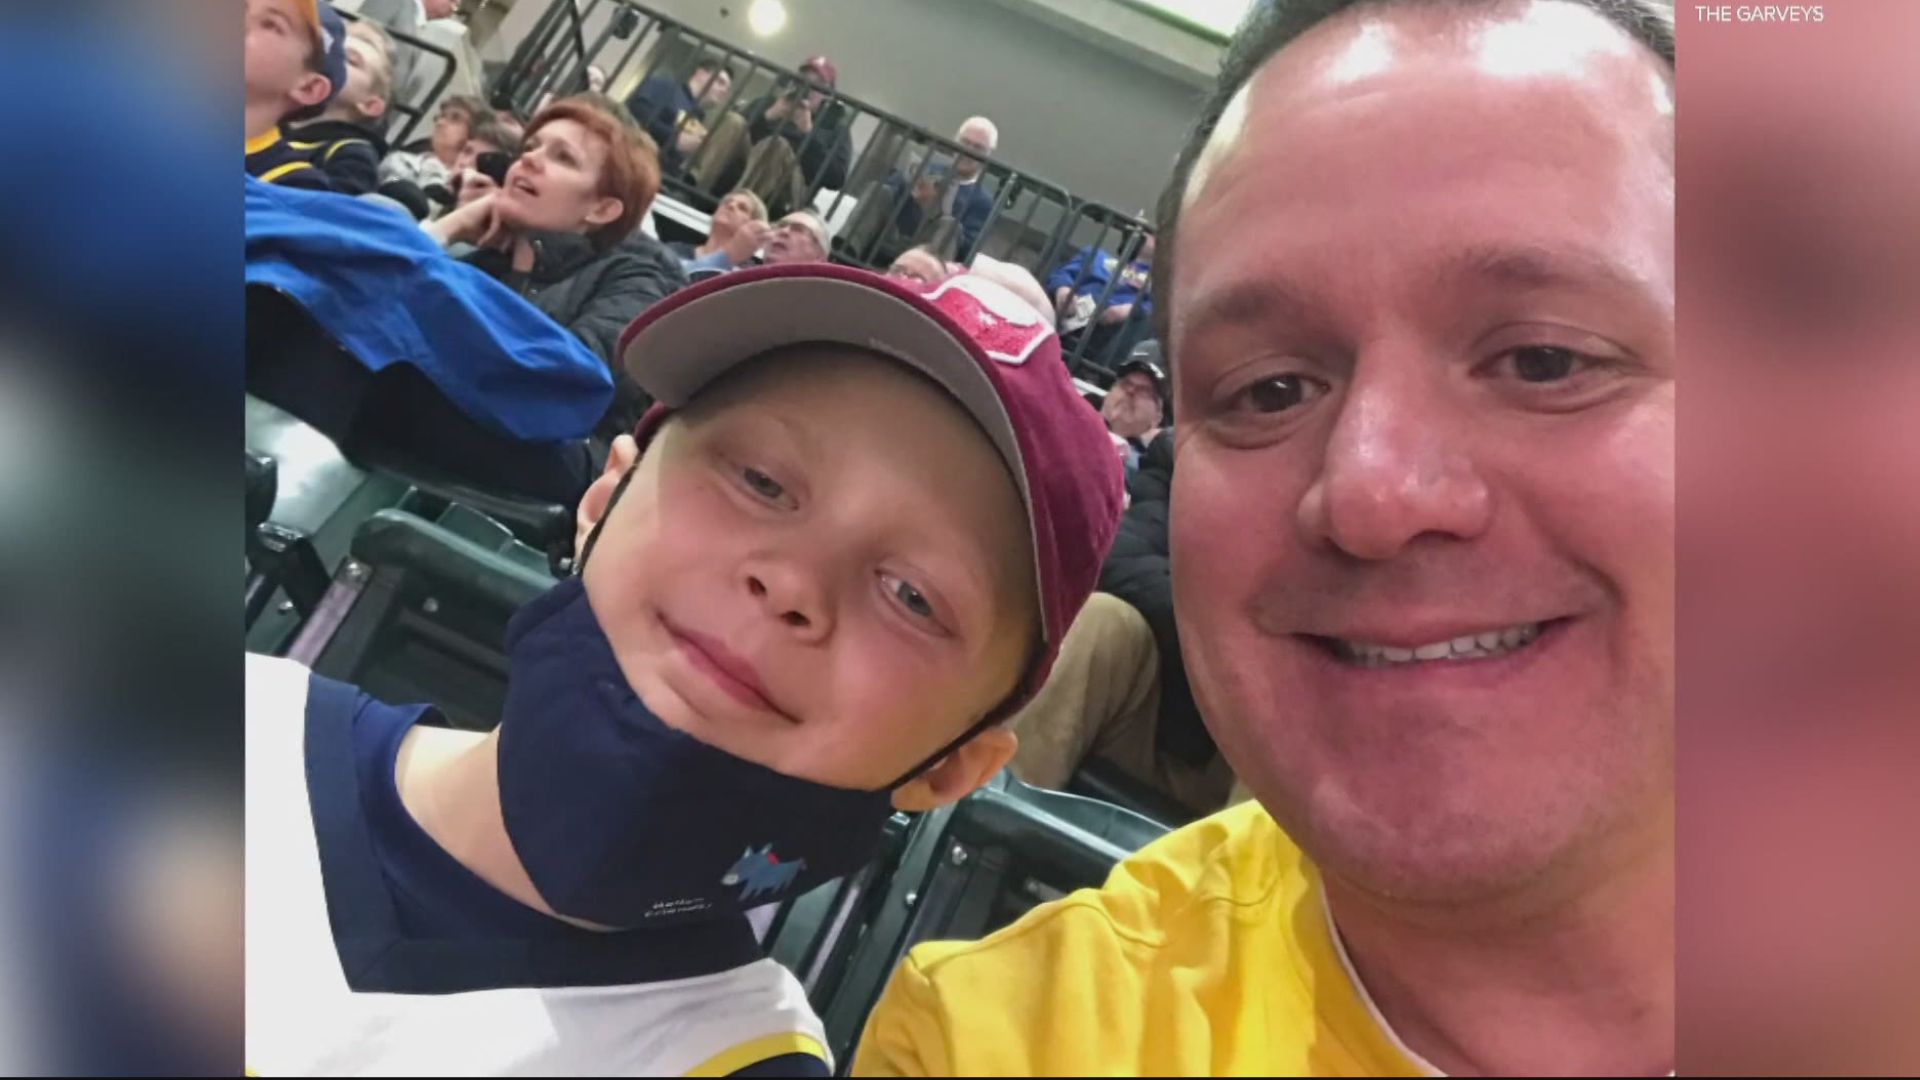 Mason Garvey's death shook Indianapolis. 
Now, his family is hoping to honor him and help other families battling cancer.